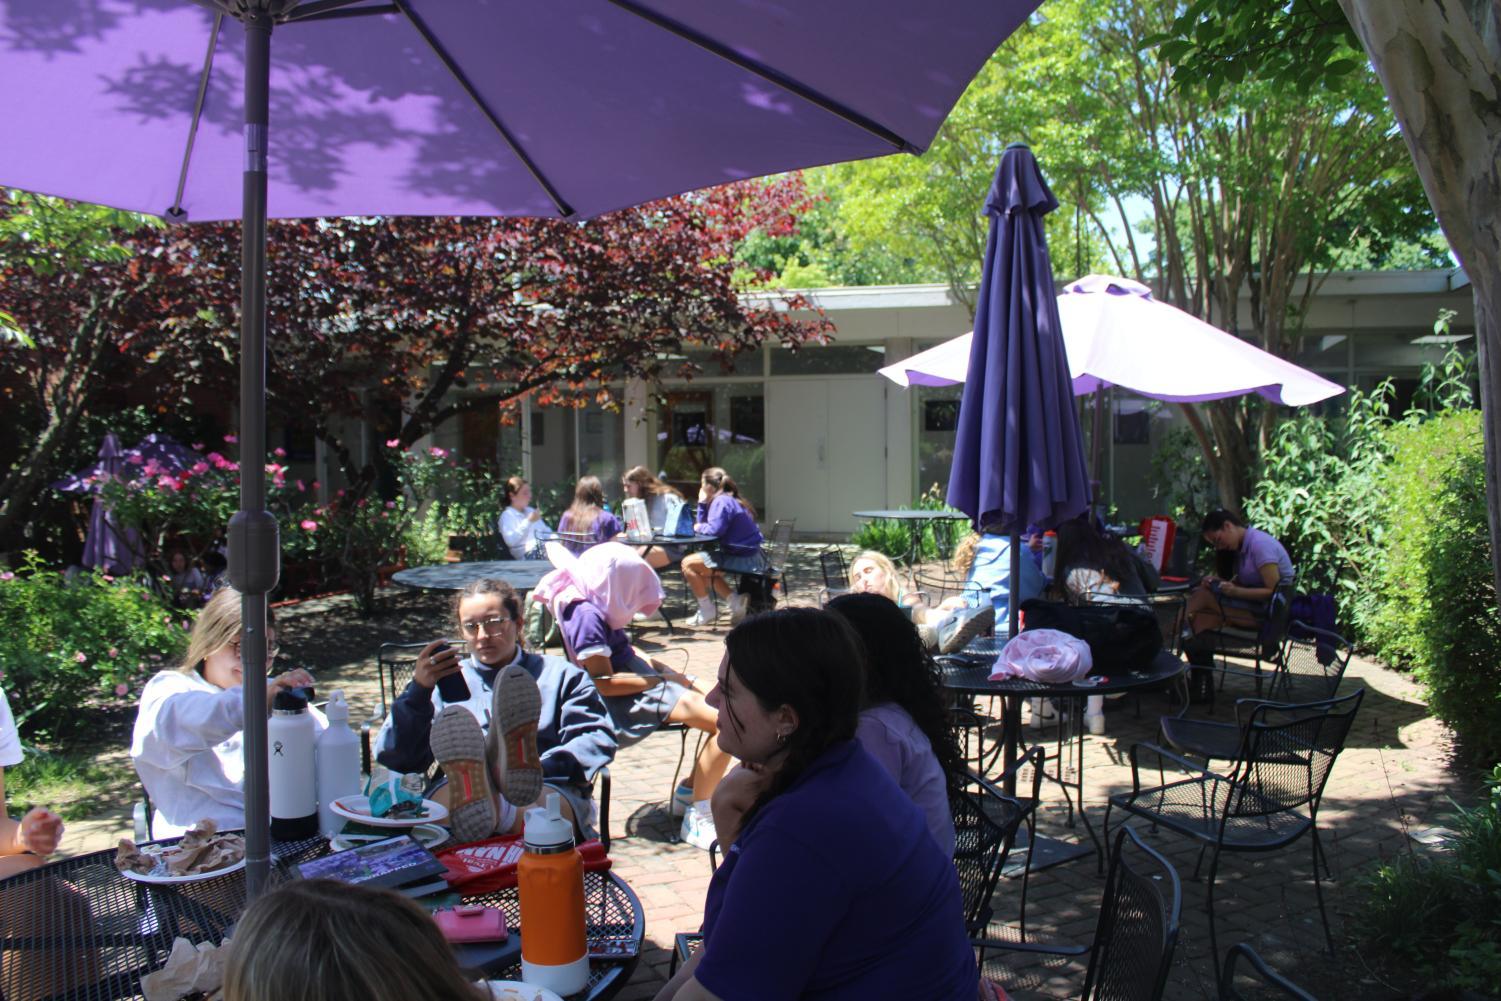 Students enjoy some outdoor seating as they enjoy the warm weather.